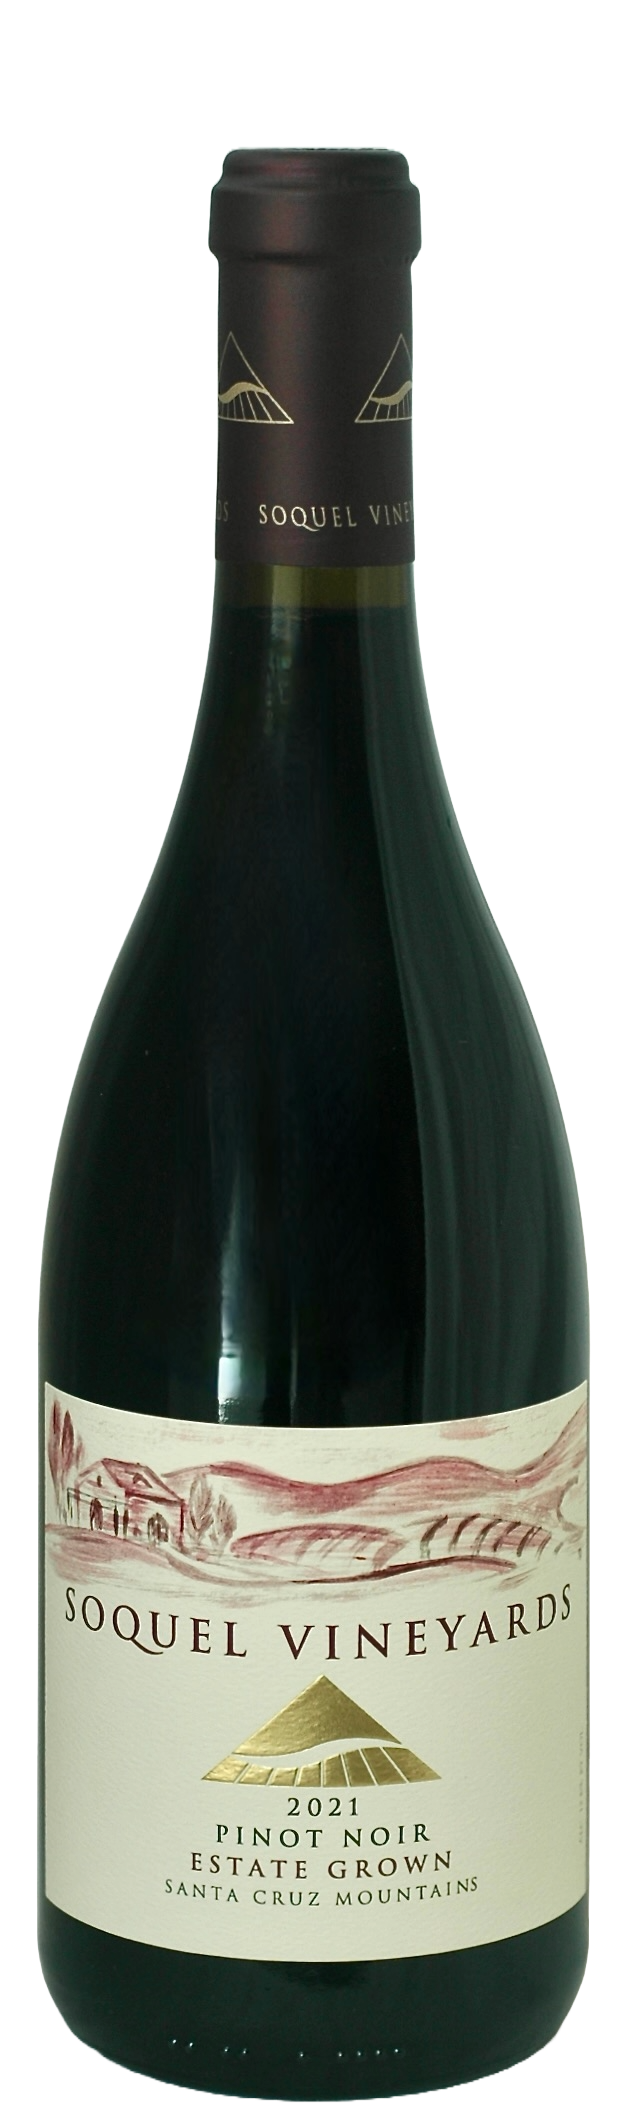 Product Image for 2021 Estate Grown Pinot Noir